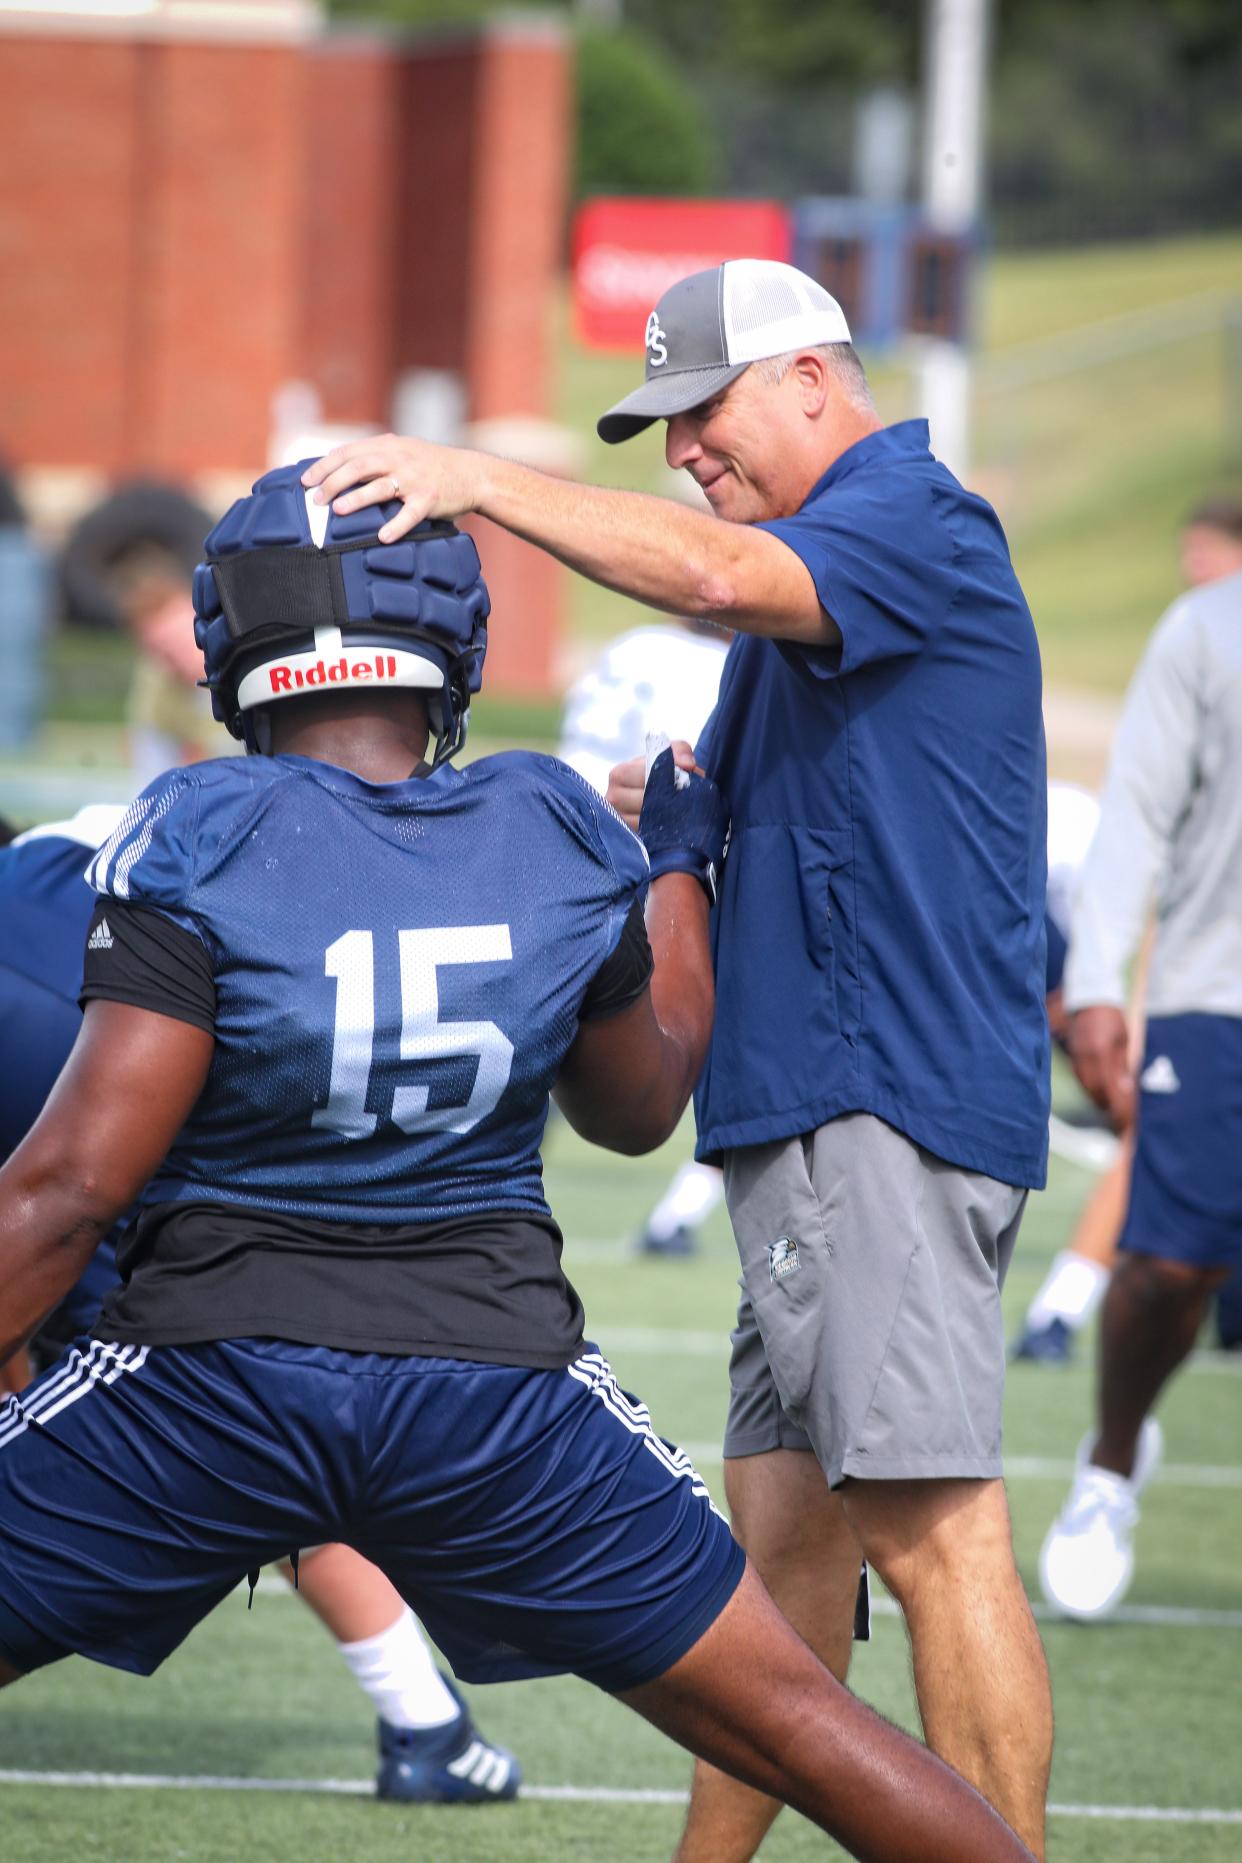 Georgia Southern's new head coach Clay Helton greets defensive lineman Quin Williams (15) on the first day of fall practice on Aug. 3, 2022 at Paulson Stadium in Statesboro.